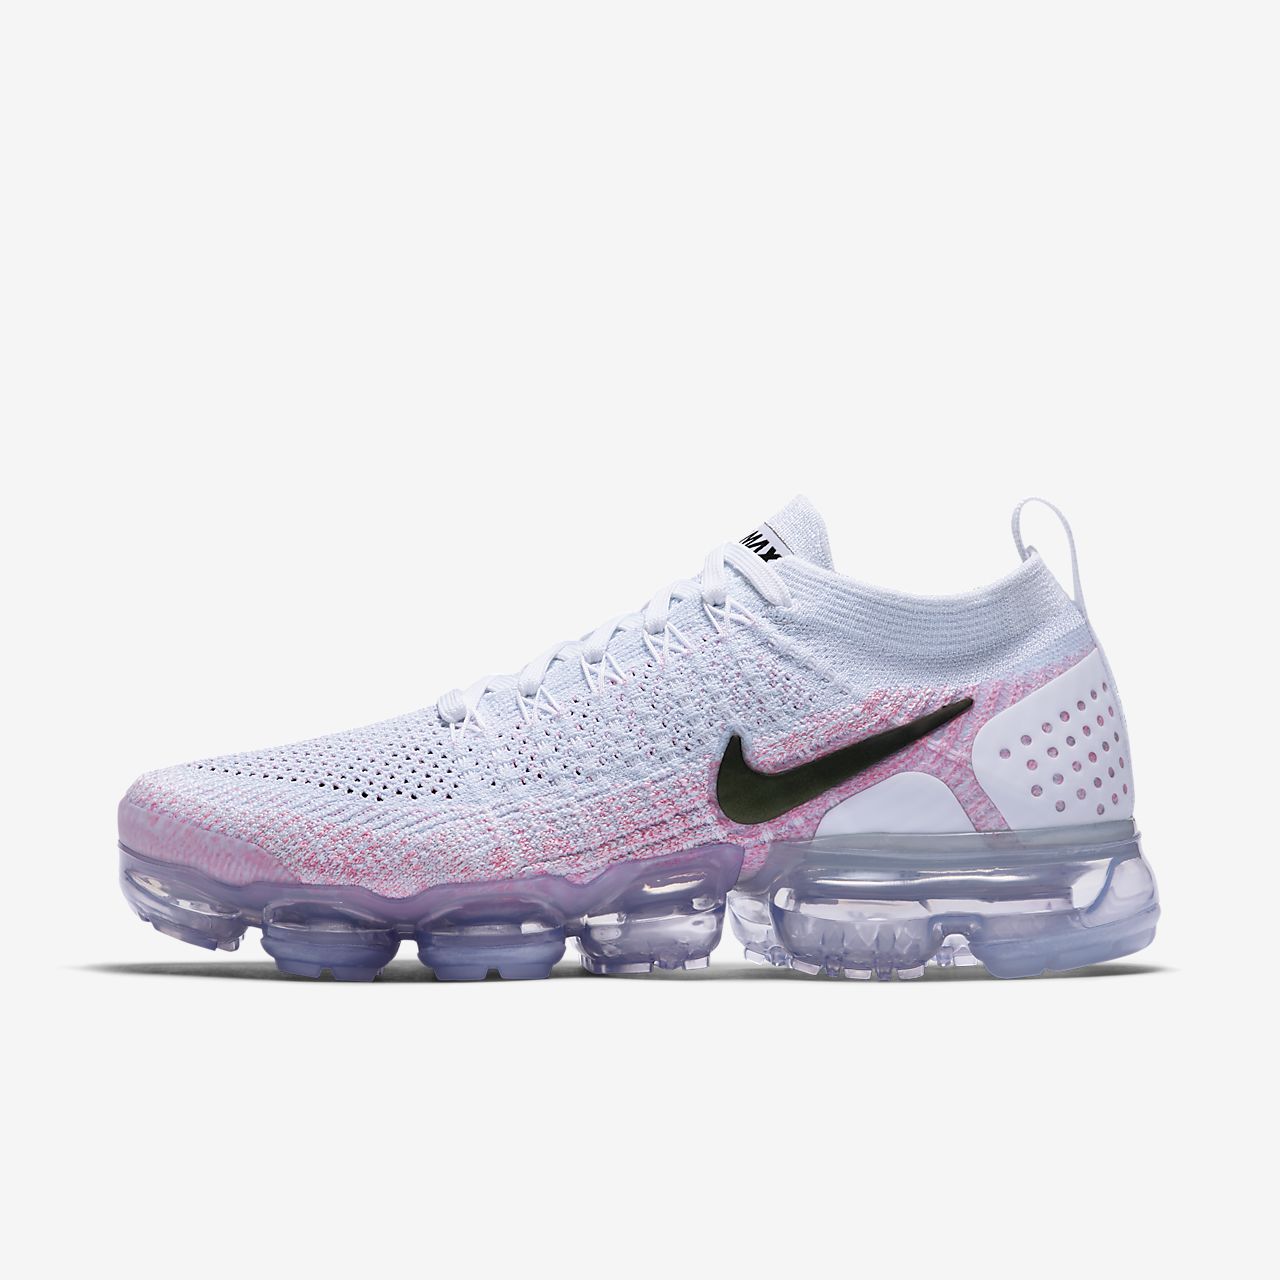 Acquista nike air vapormax flyknit donna 2017 - OFF43% sconti